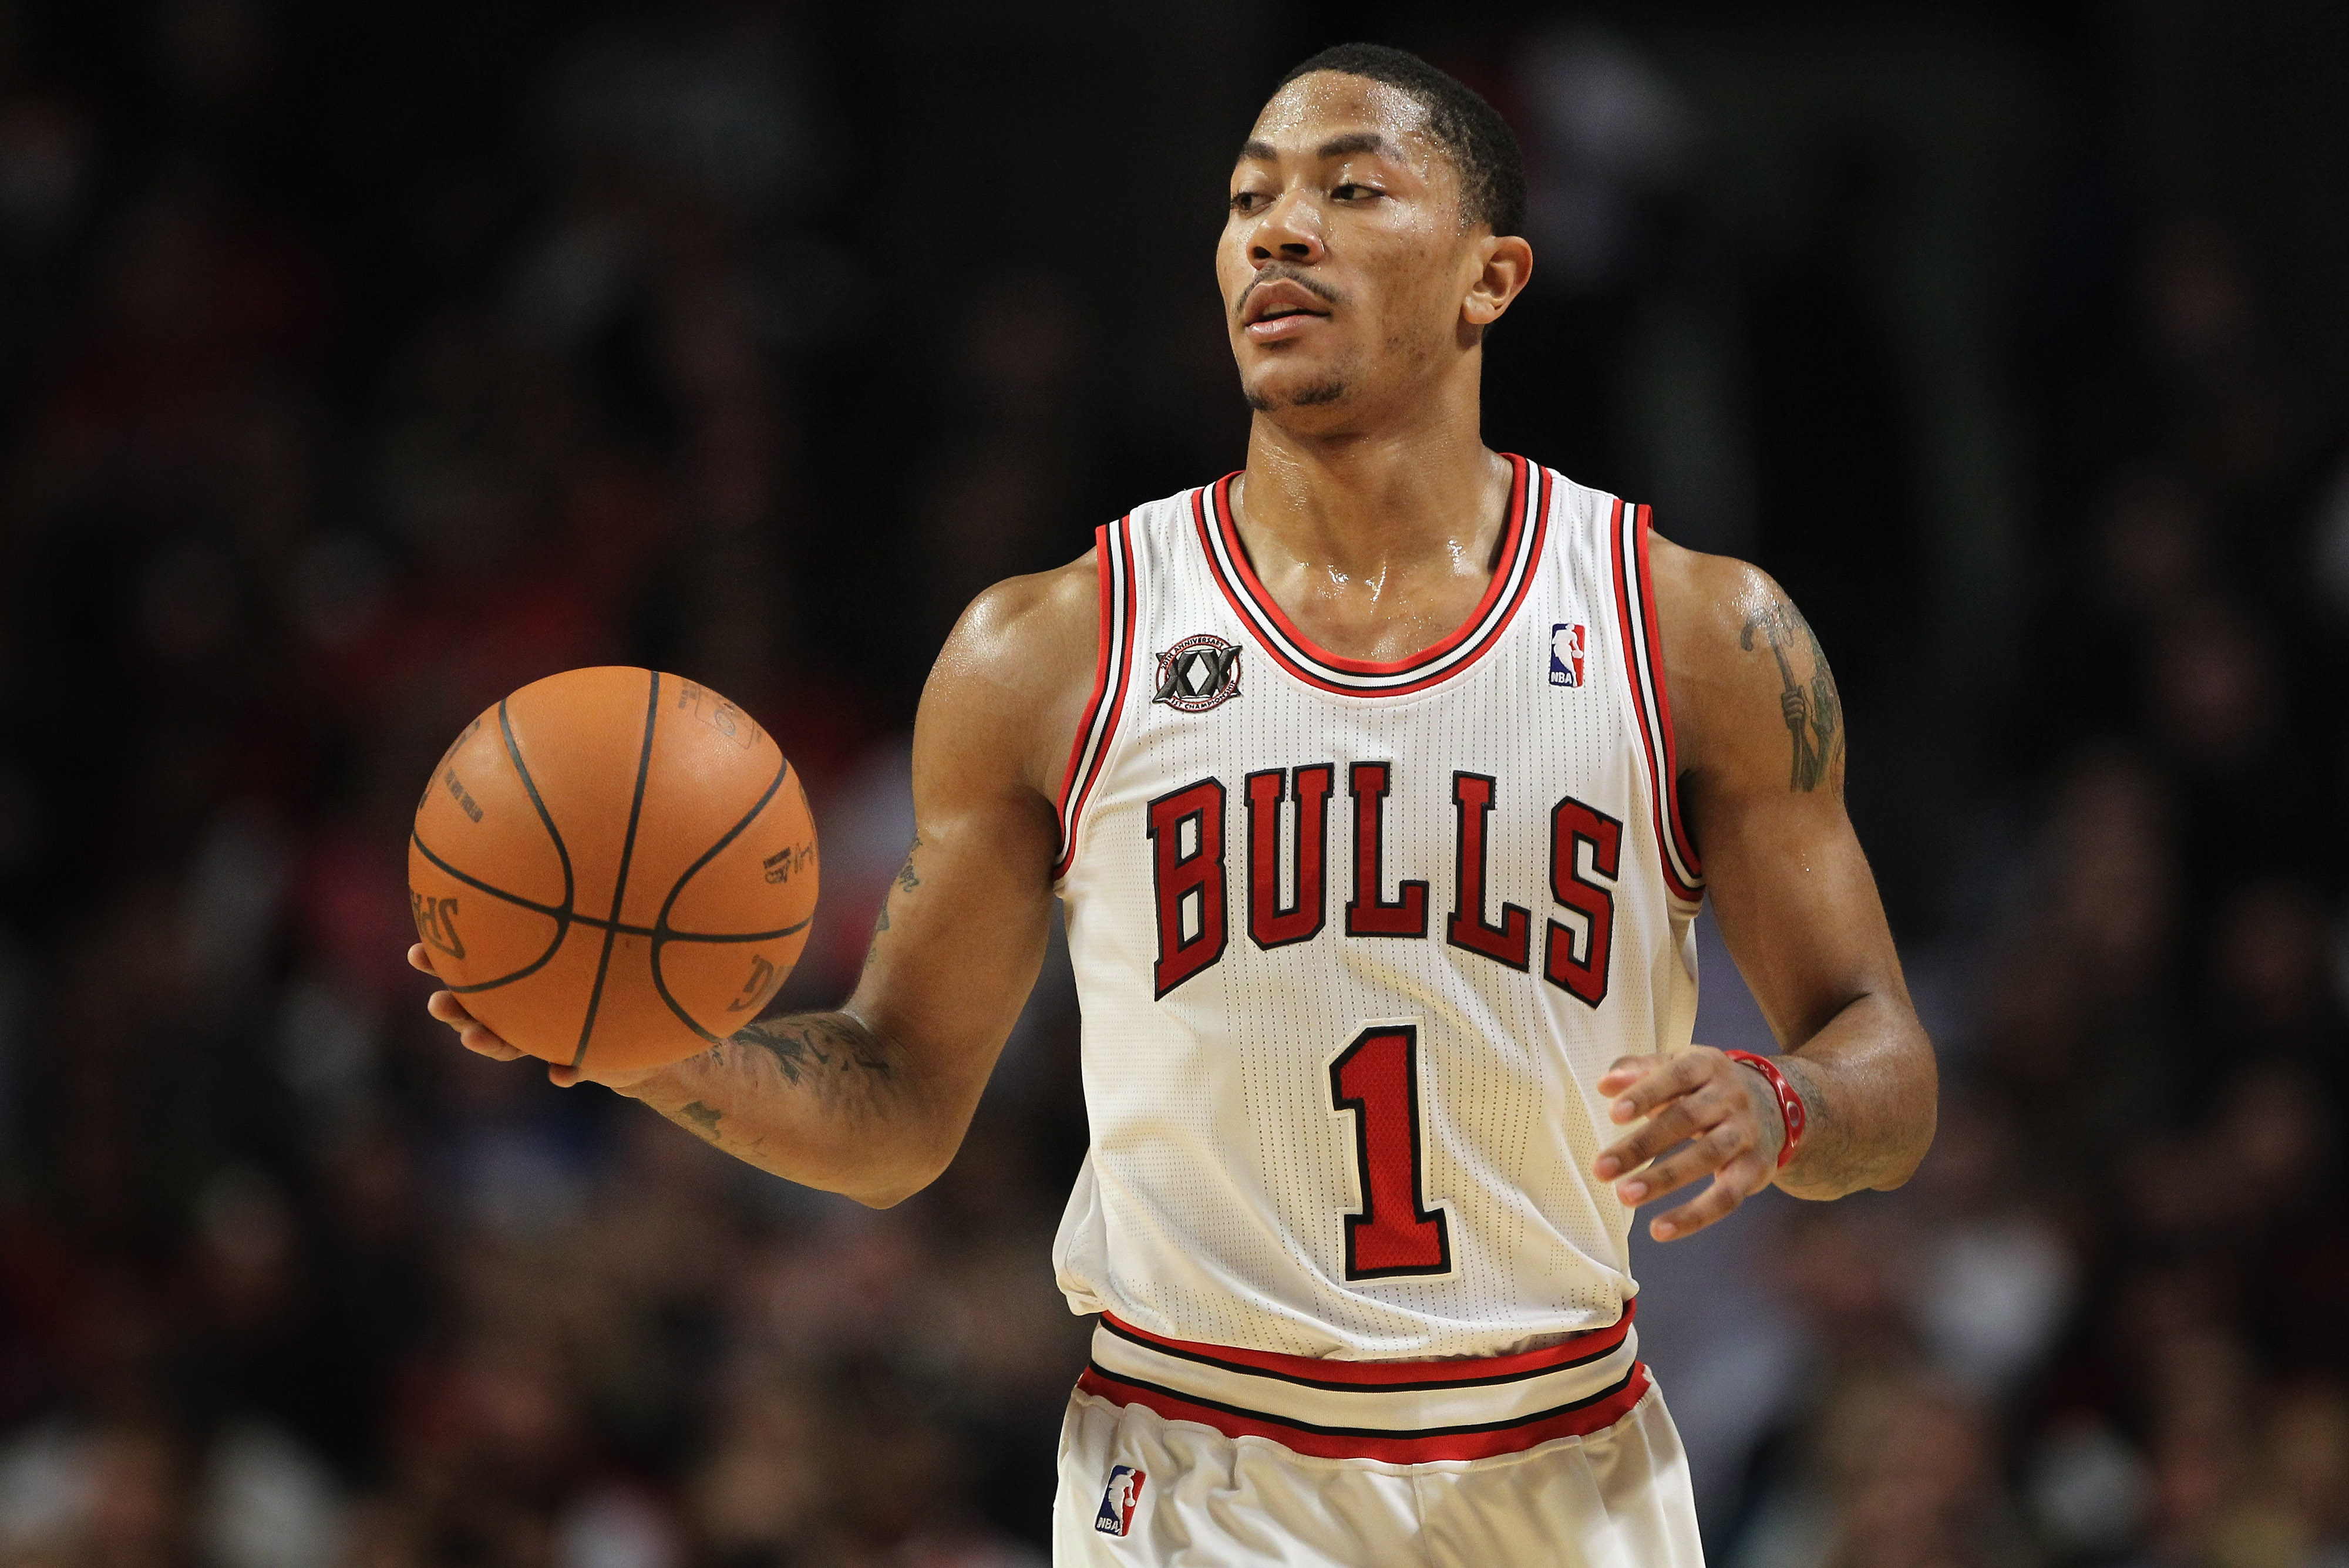 Derrick Rose: 10 Reasons He Is the Greatest Chicago Bulls Point